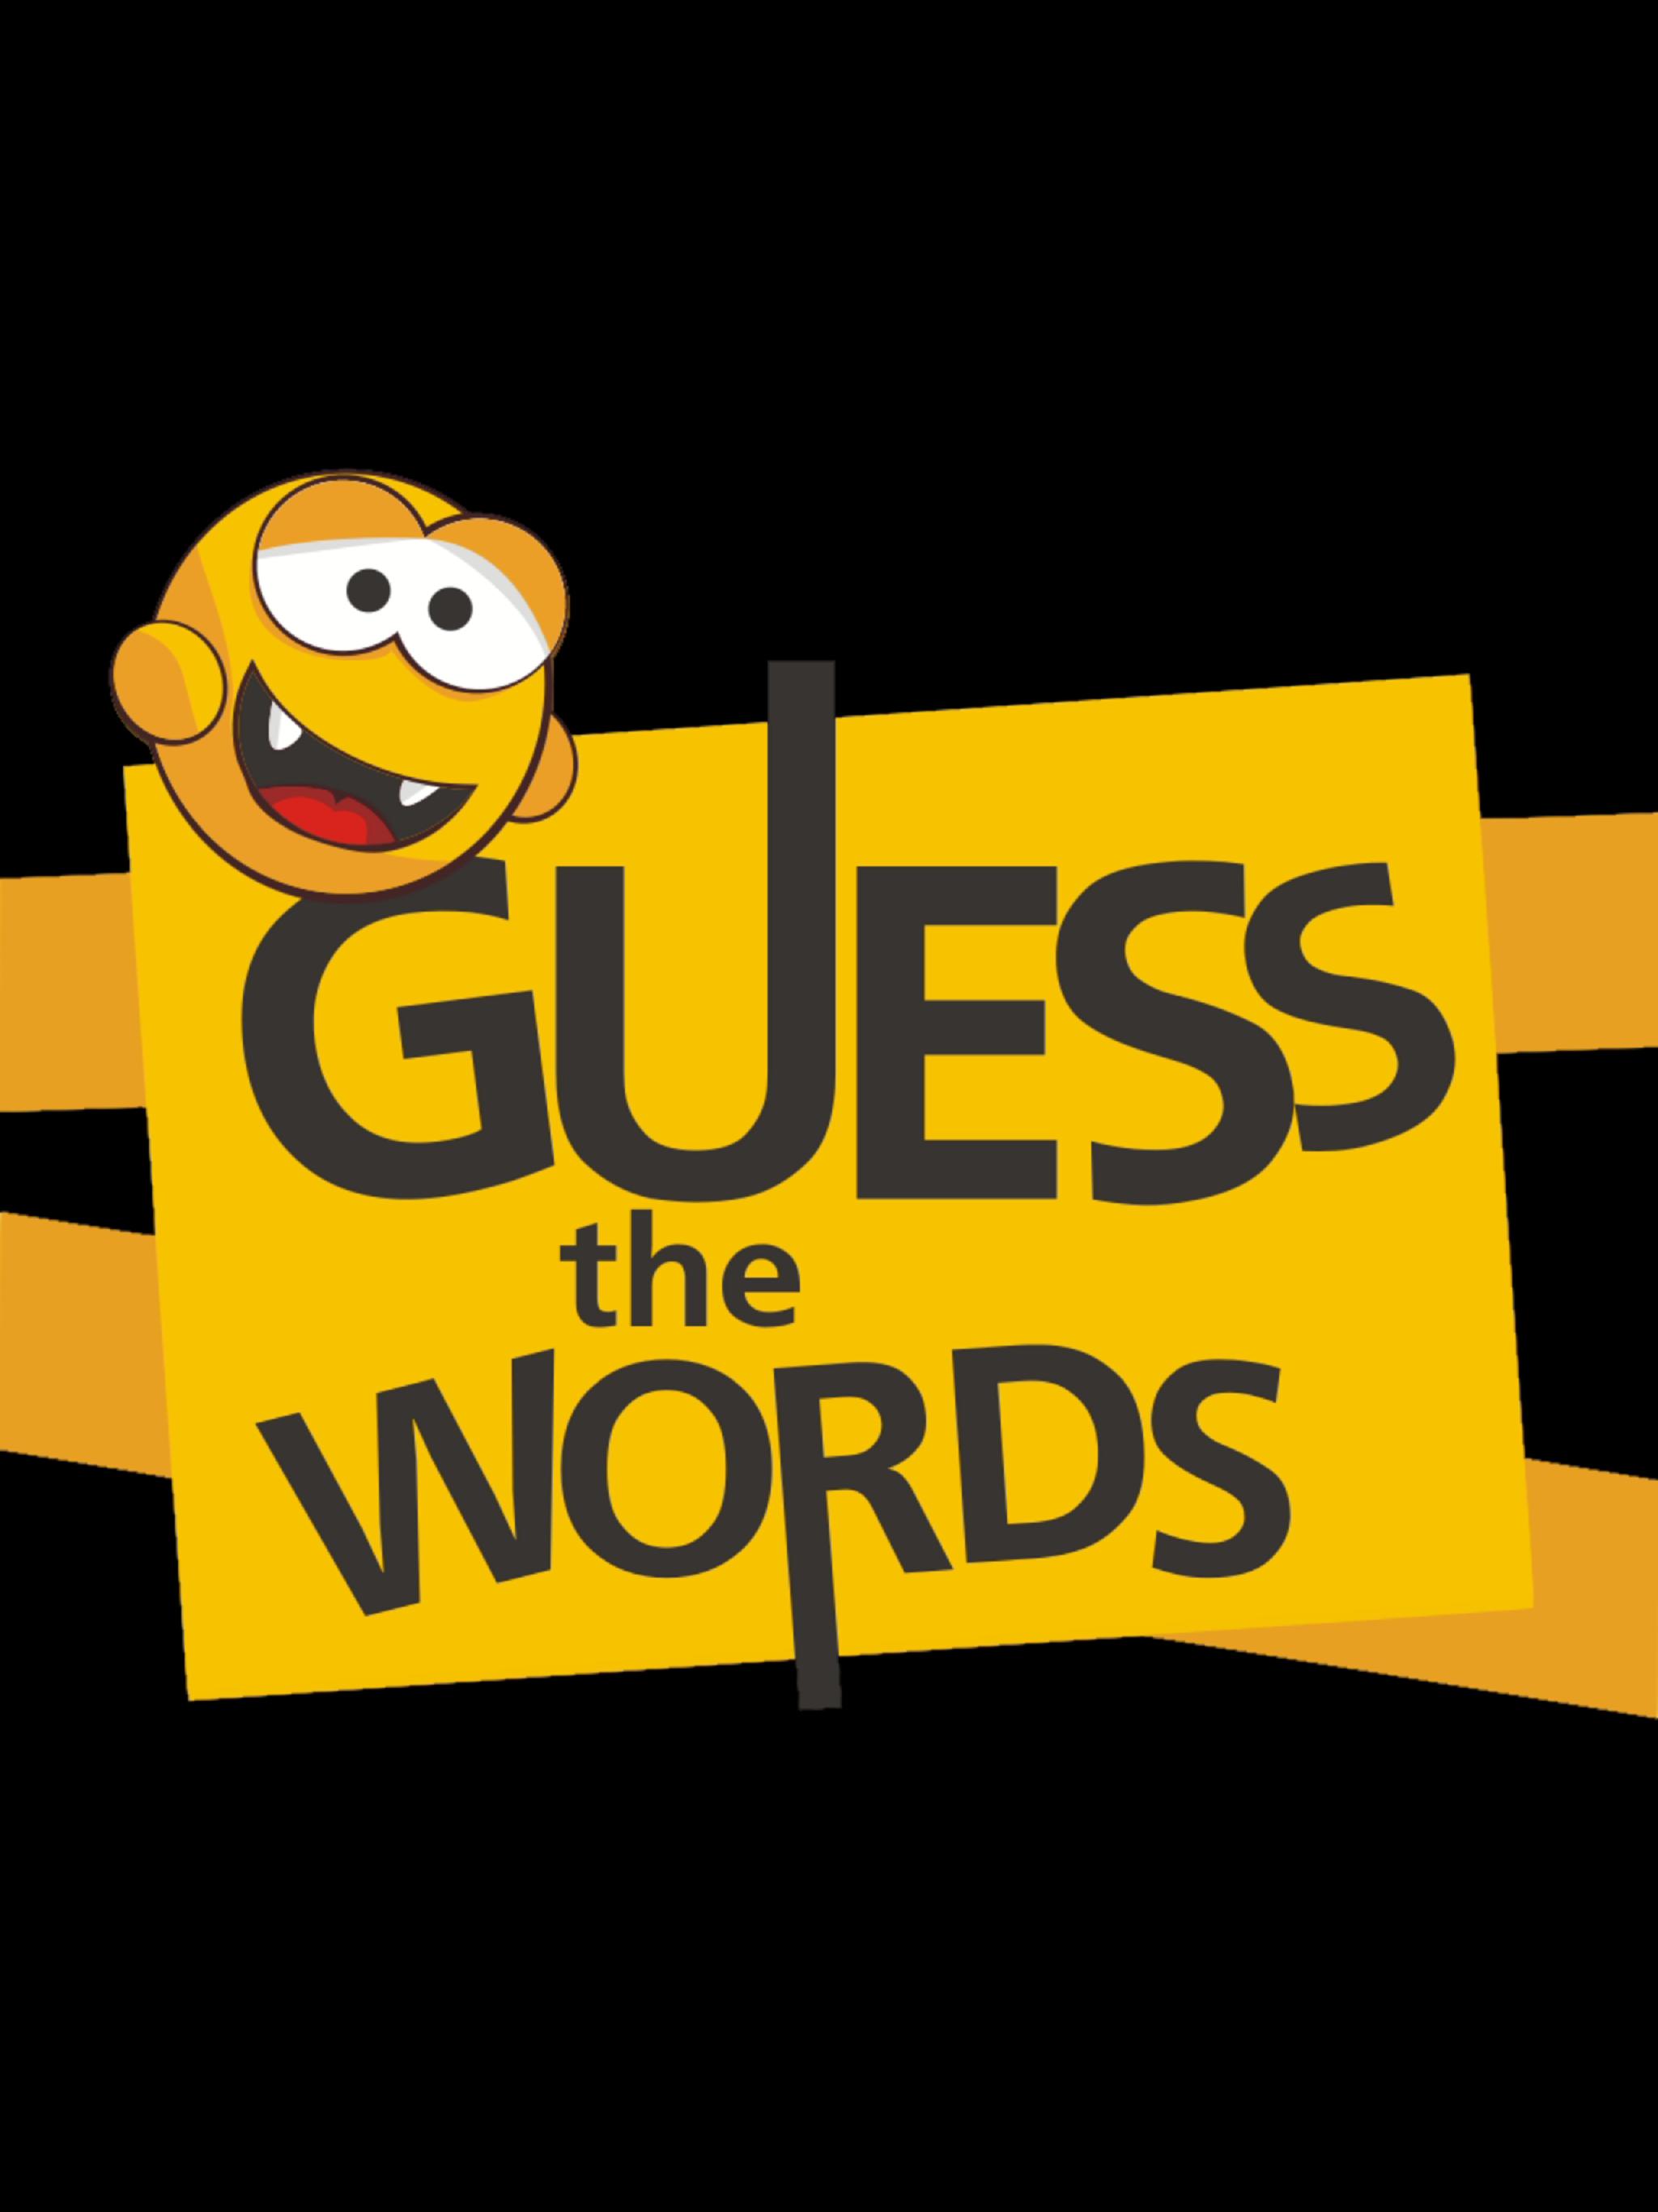 Guess word угадай. Guesword. Guess. Игра Гуес ворд. Guess слово.